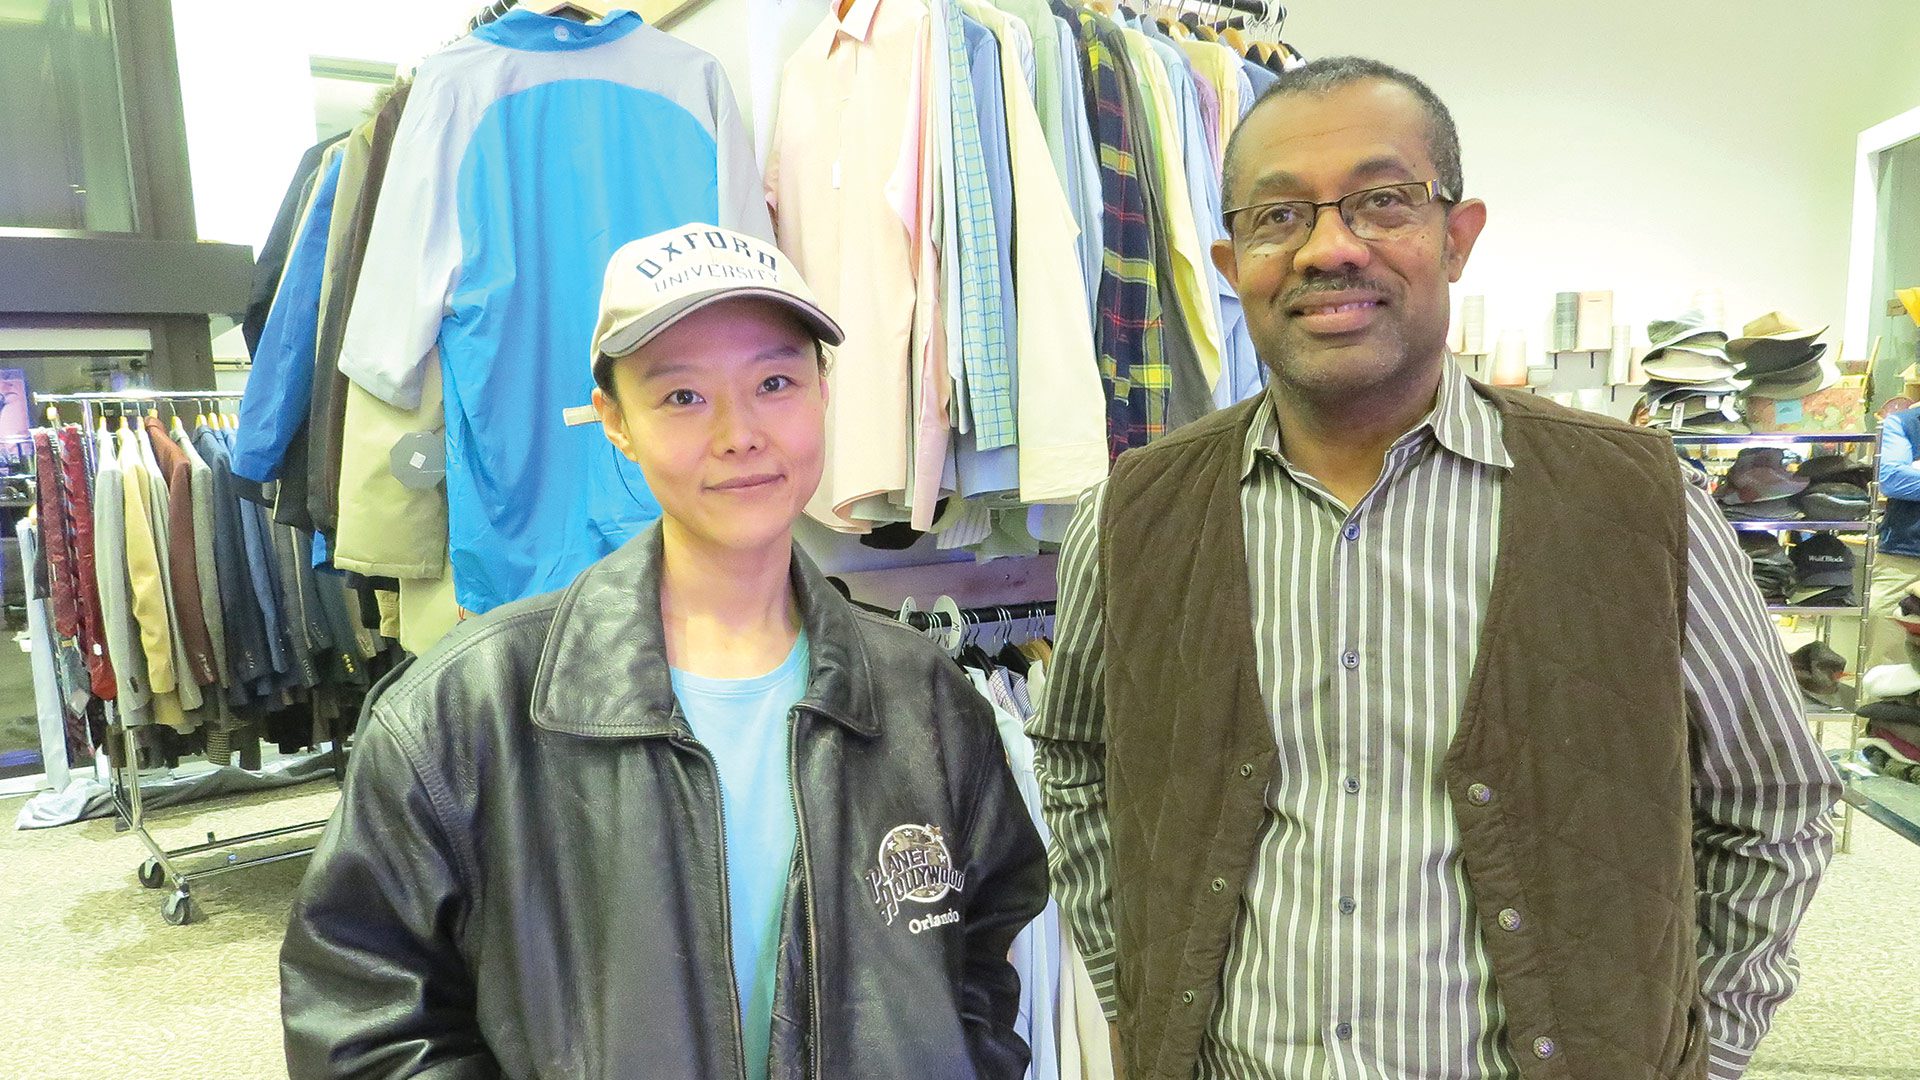 Wenting Jia, left, has partnered with Dick Robasson